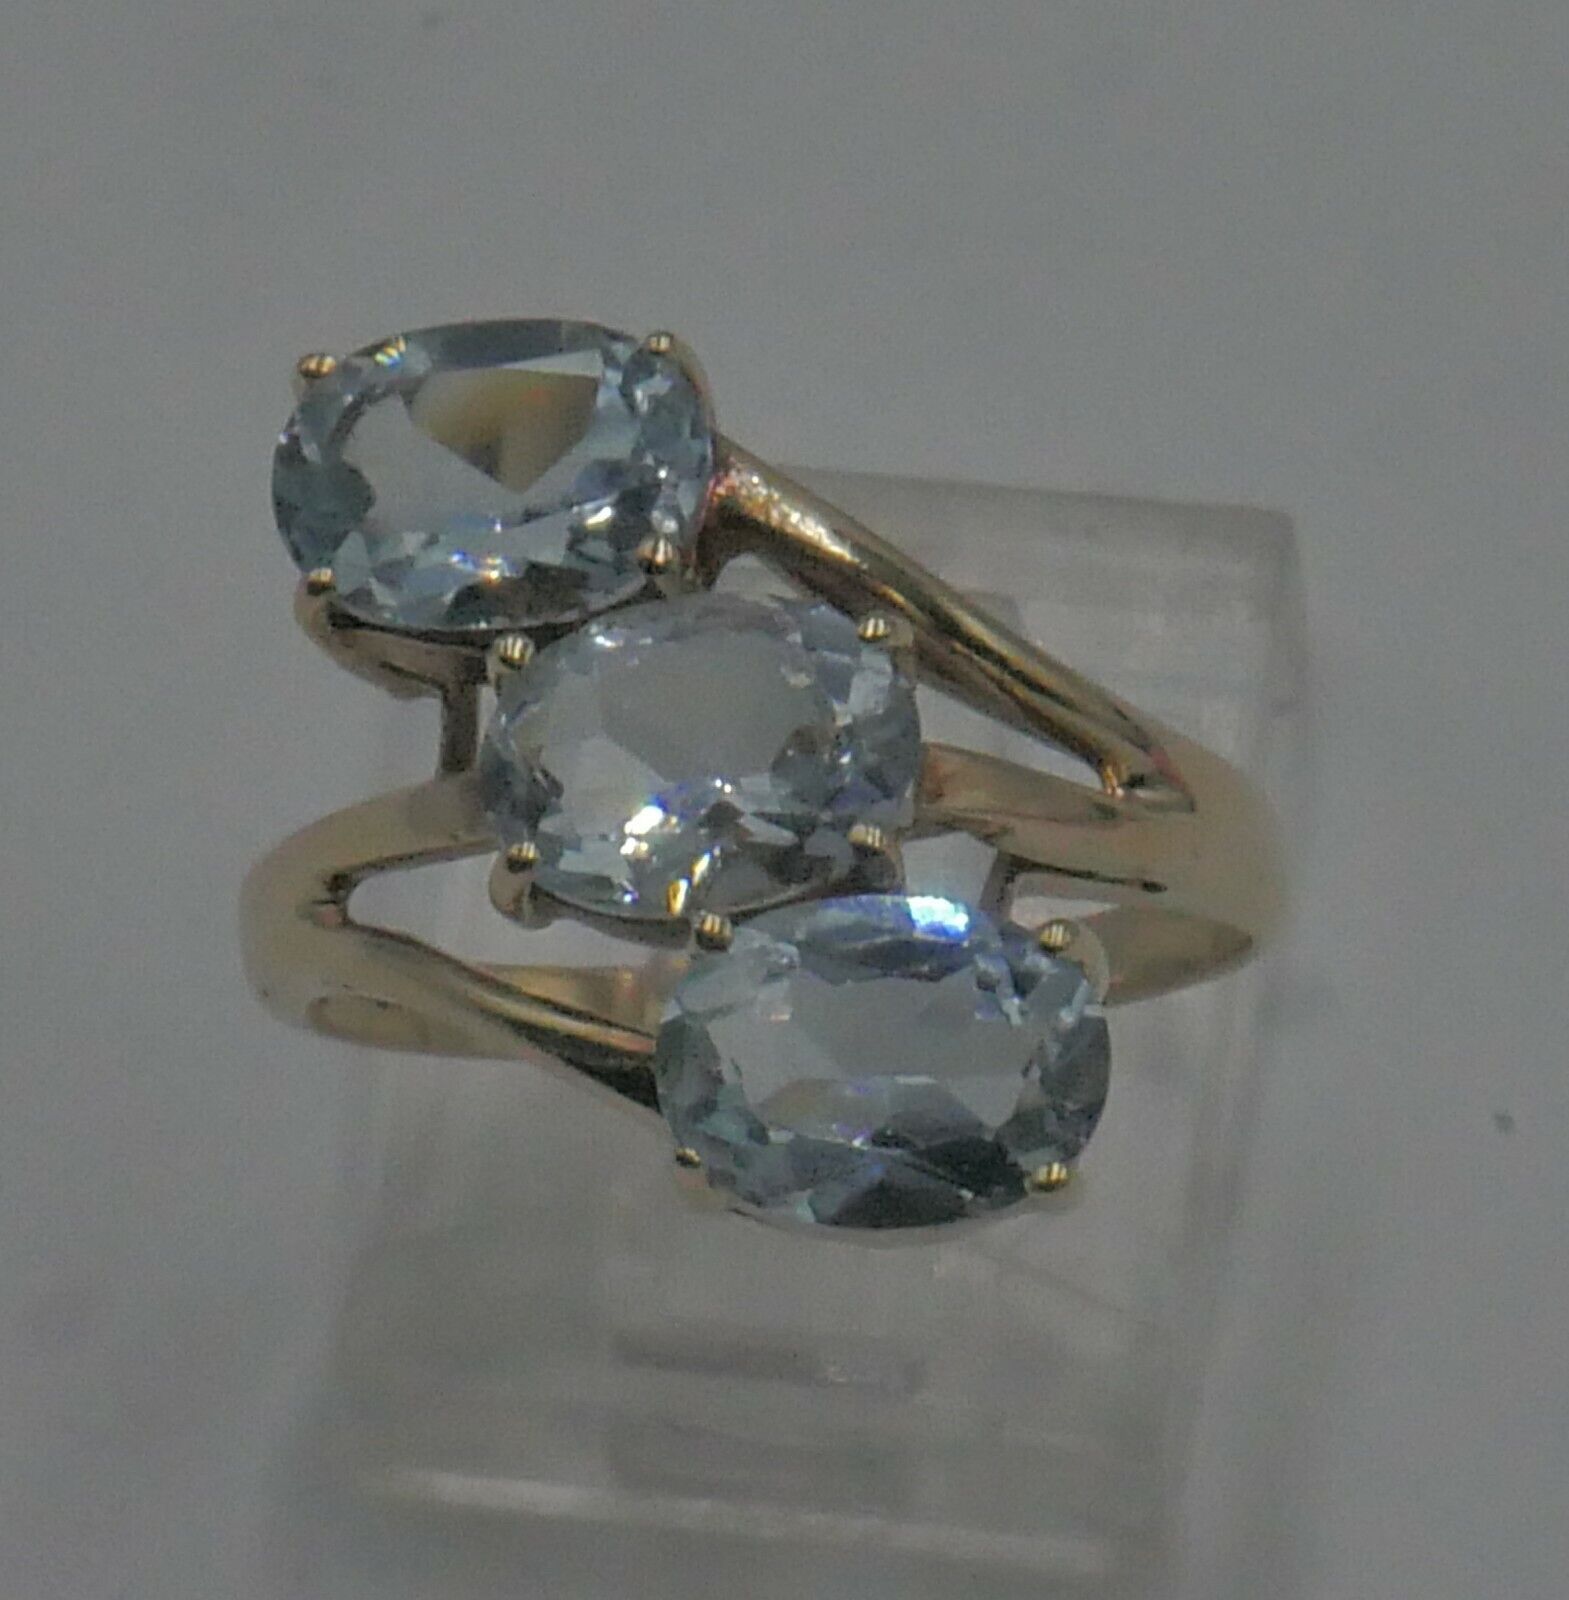 10KT YELLOW GOLD RING 3.5 GRAMS SIZE 7 WITH 3 LIGHT BLUE STONES MINT .867957-1.